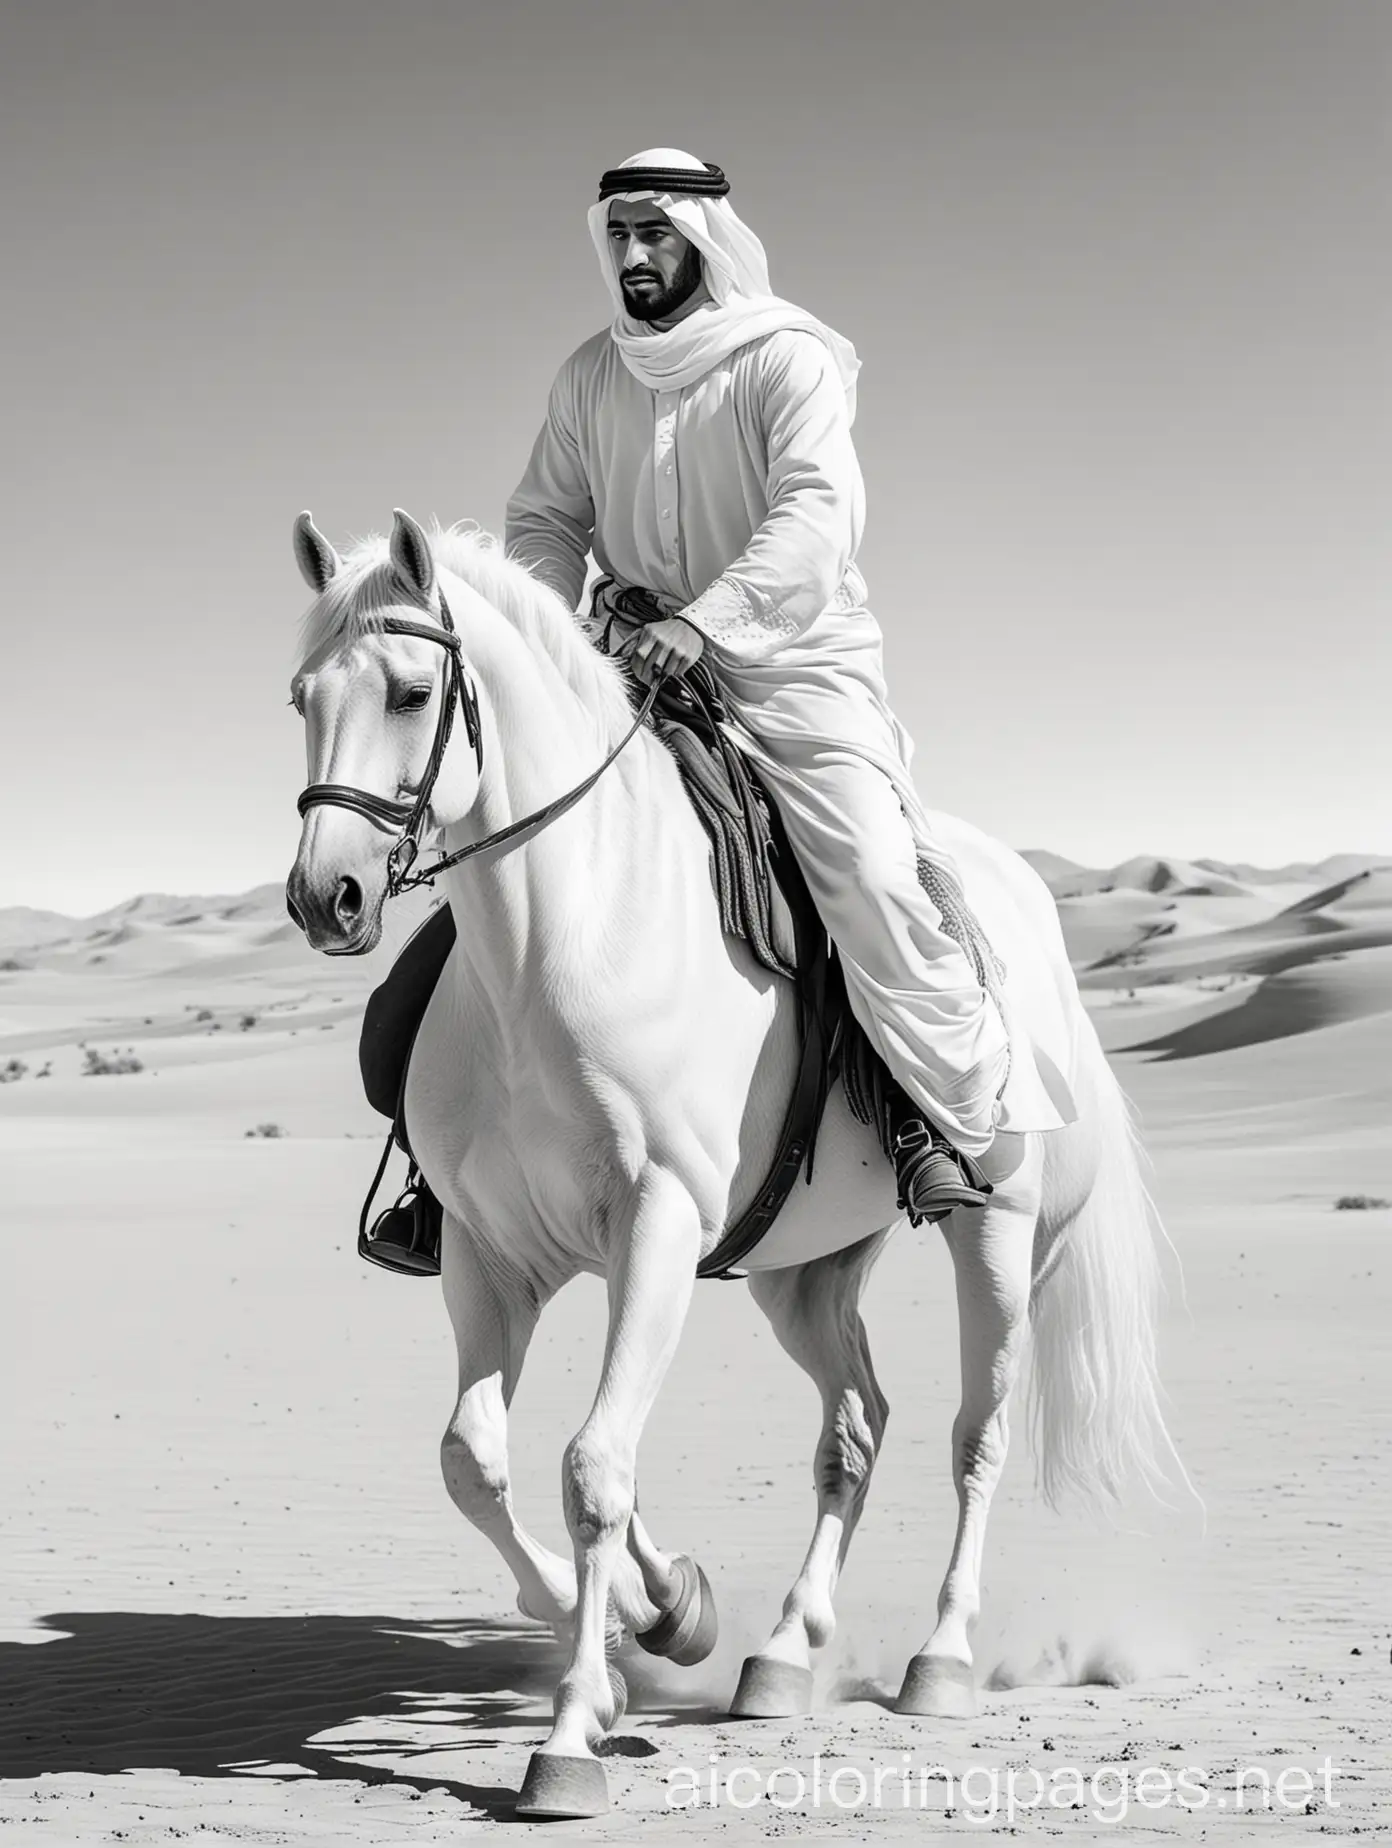 Créer une image d'un homme arabe sur un poney de jument blanche dans le désert, Coloring Page, black and white, line art, white background, Simplicity, Ample White Space. The background of the coloring page is plain white to make it easy for young children to color within the lines. The outlines of all the subjects are easy to distinguish, making it simple for kids to color without too much difficulty